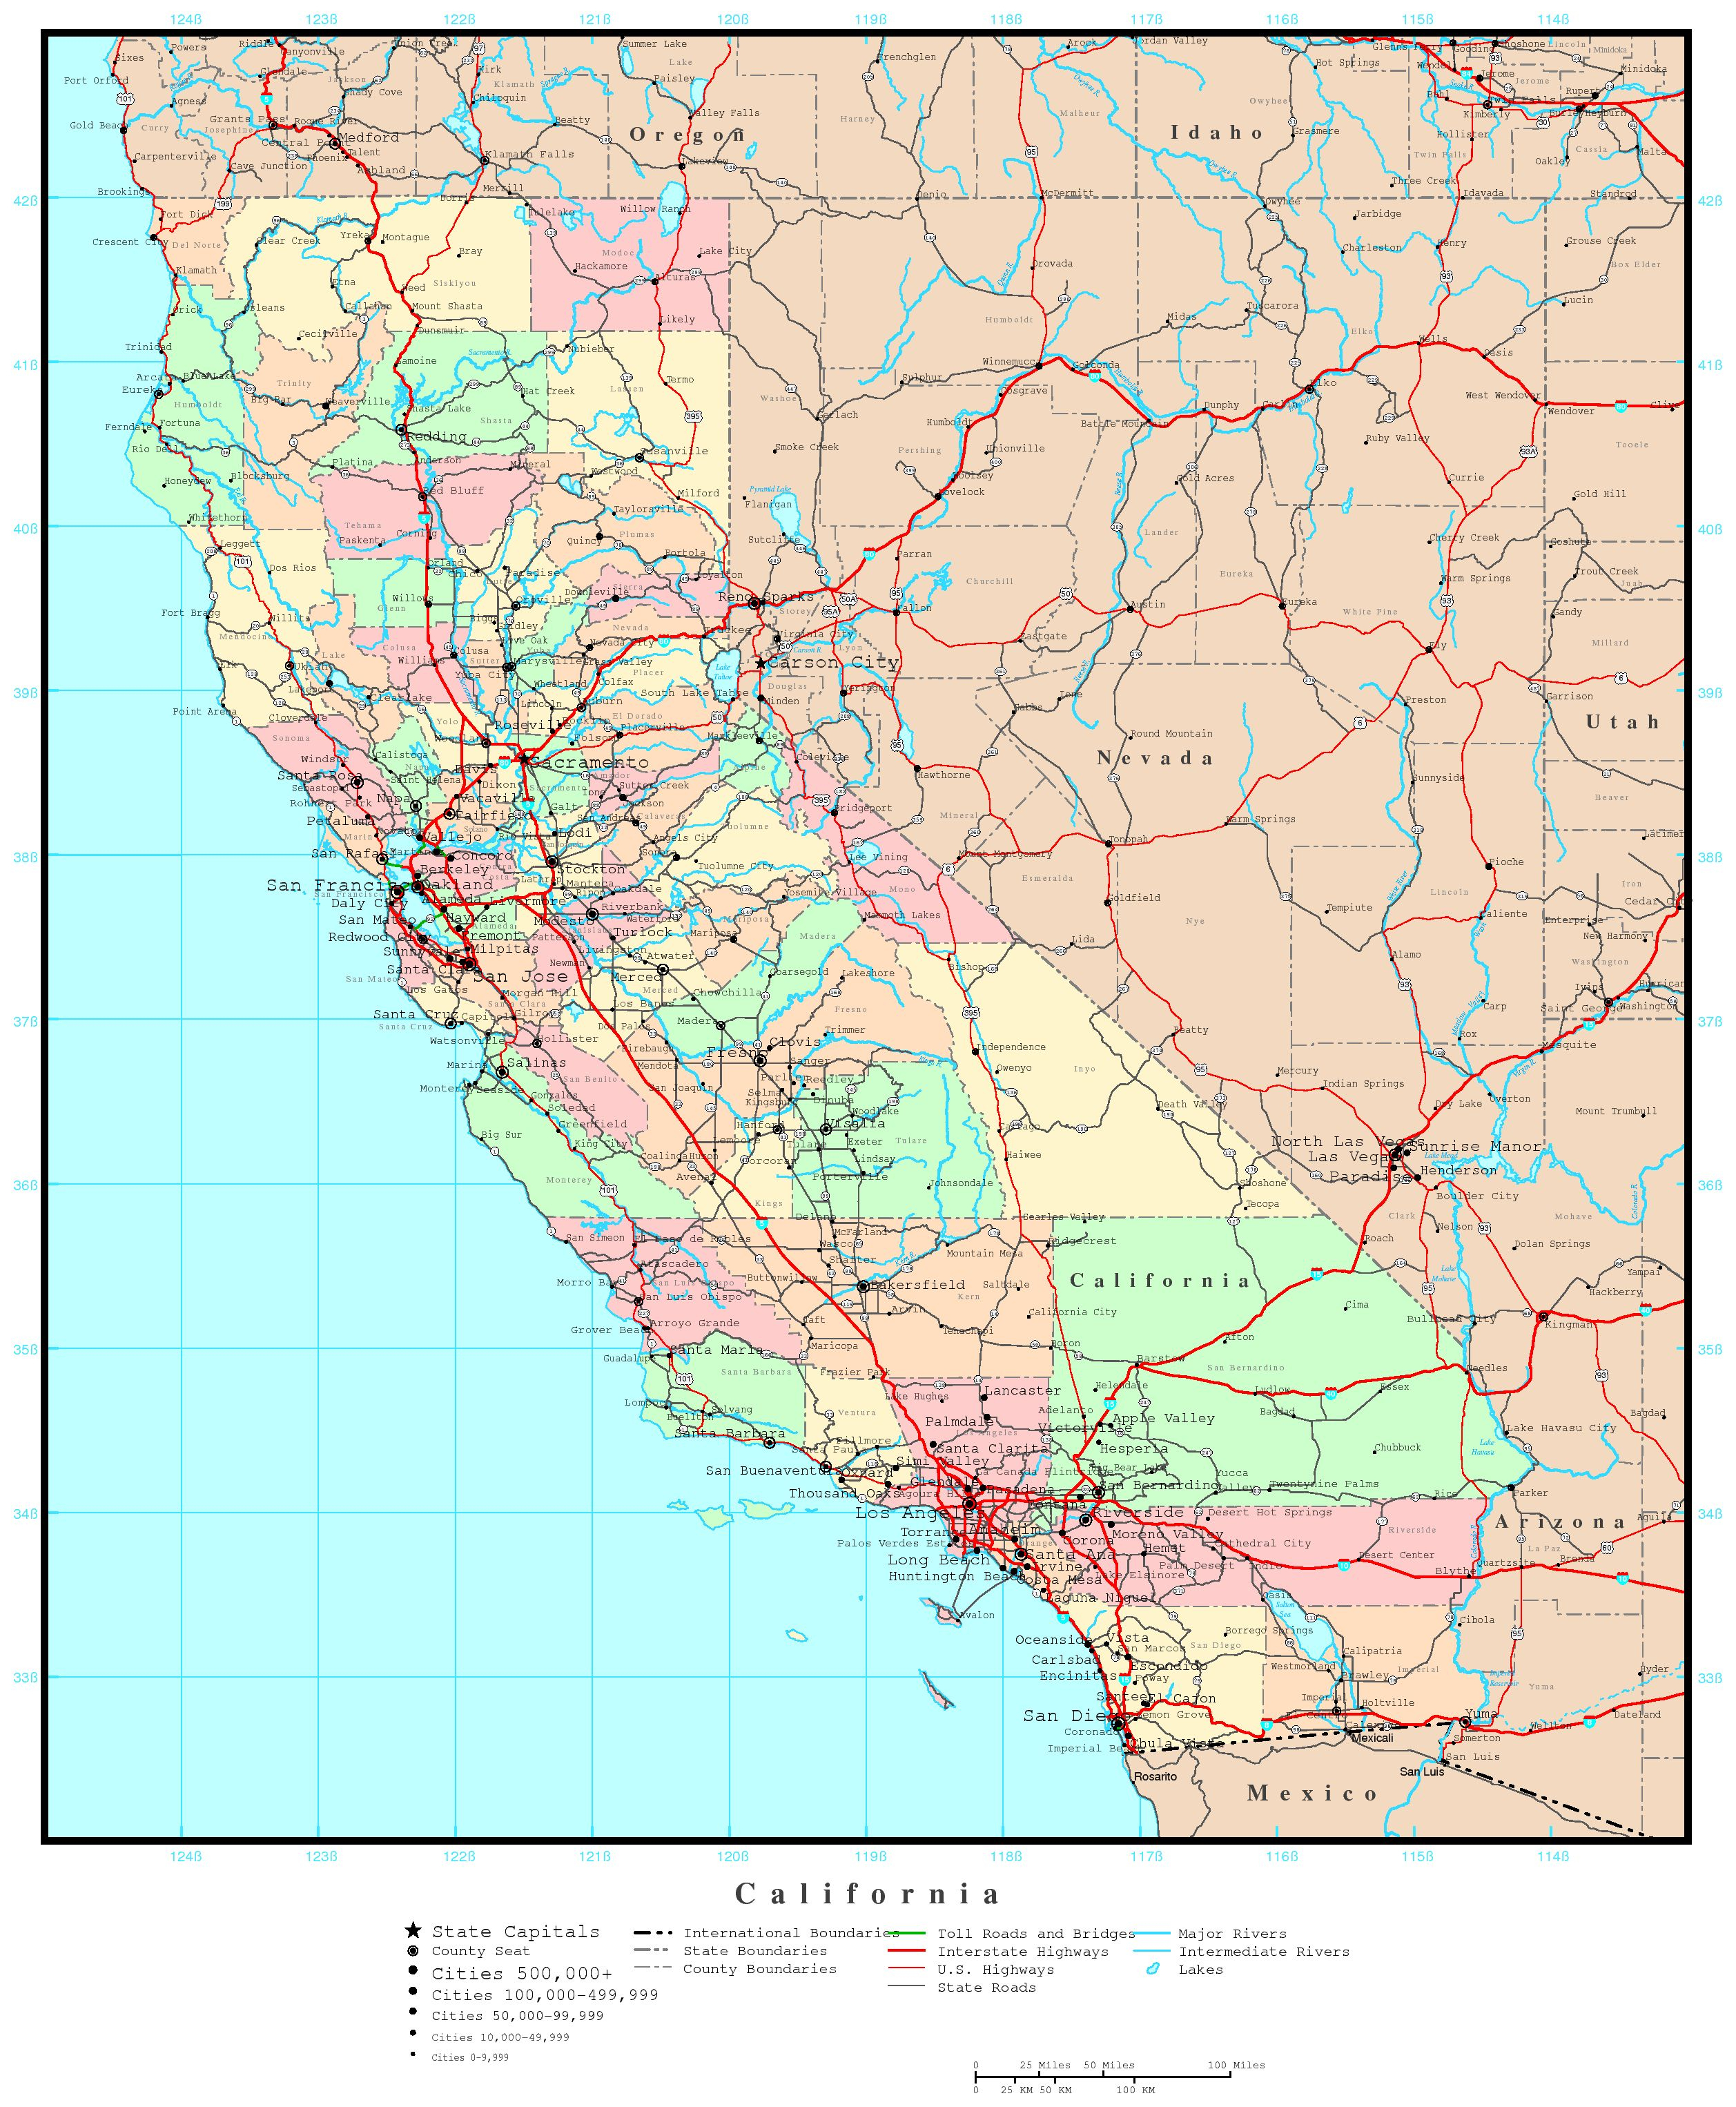 Map Of California And Nevada With Cities - Klipy - Road Map Of California And Nevada